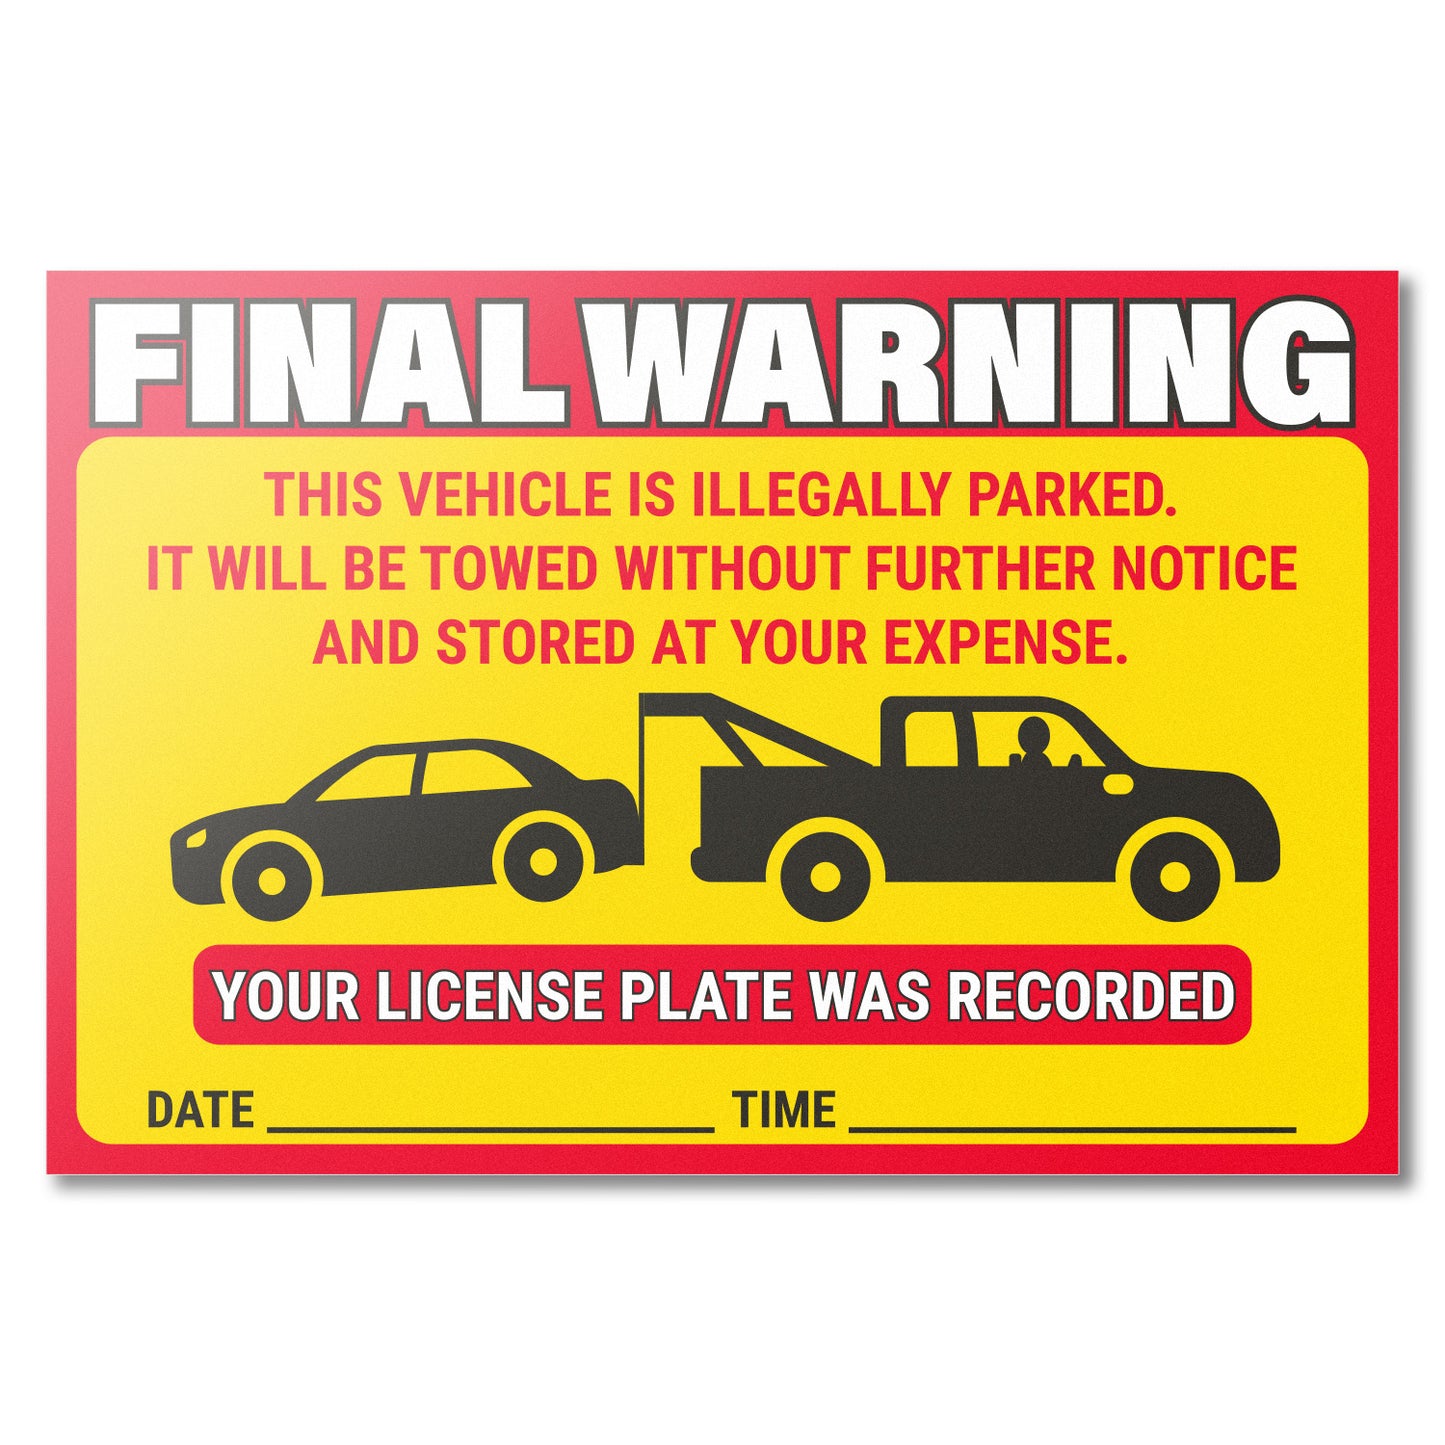 9 x 6 inch | Parking Violation: Final Warning! Vehicle is Illegally Parked Stickers